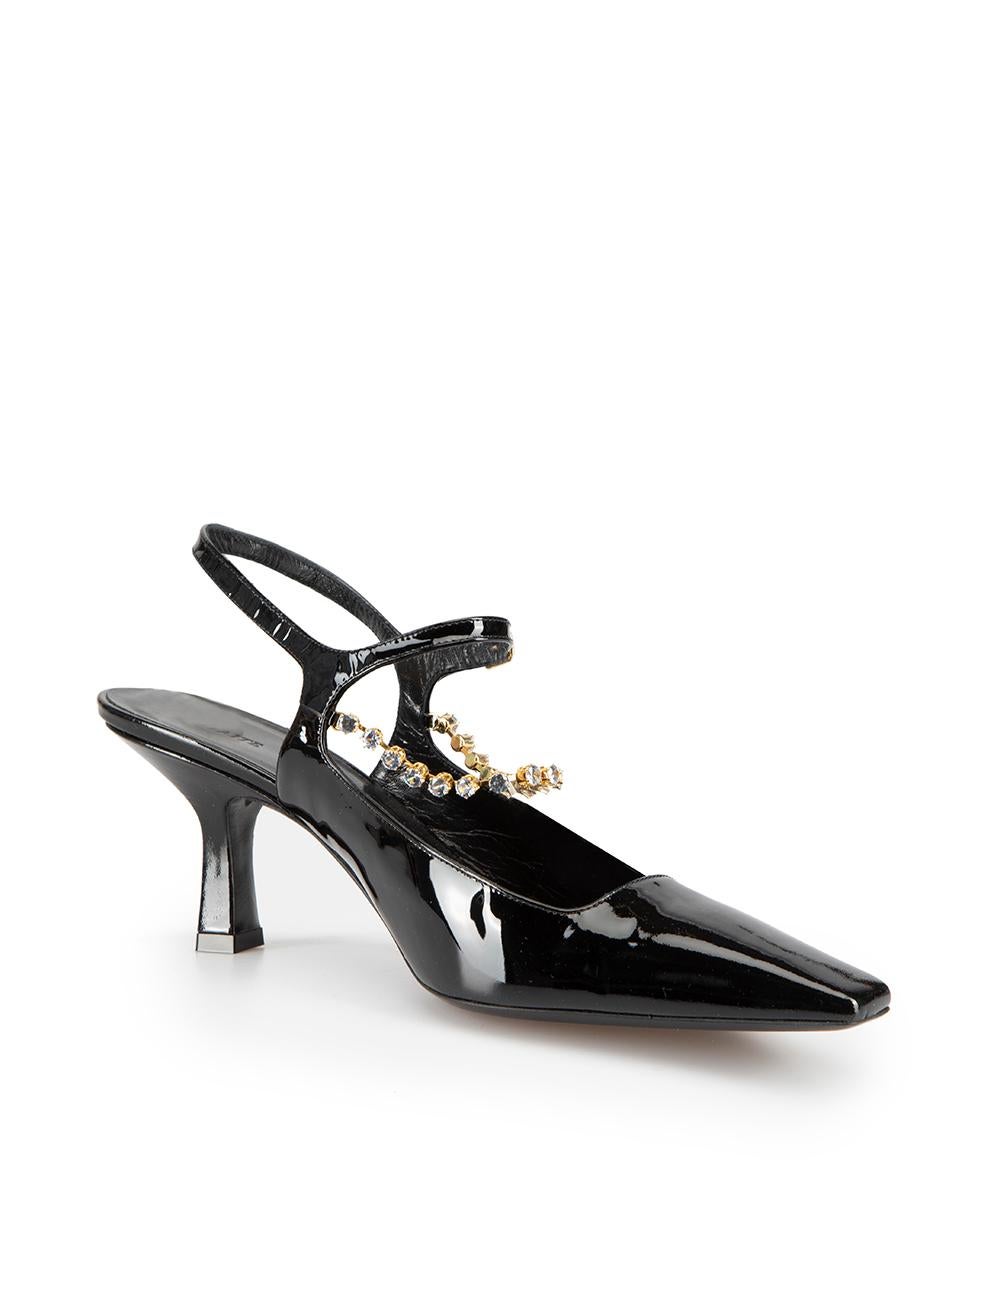 CONDITION is Very good. Hardly any visible wear to shoes is evident on this used Khaite designer resale item.



Details


Black

Patent leather

Square-toe heels

Square heel

Adjustable ankle strap

Gold tone jewel chain



 

Made in